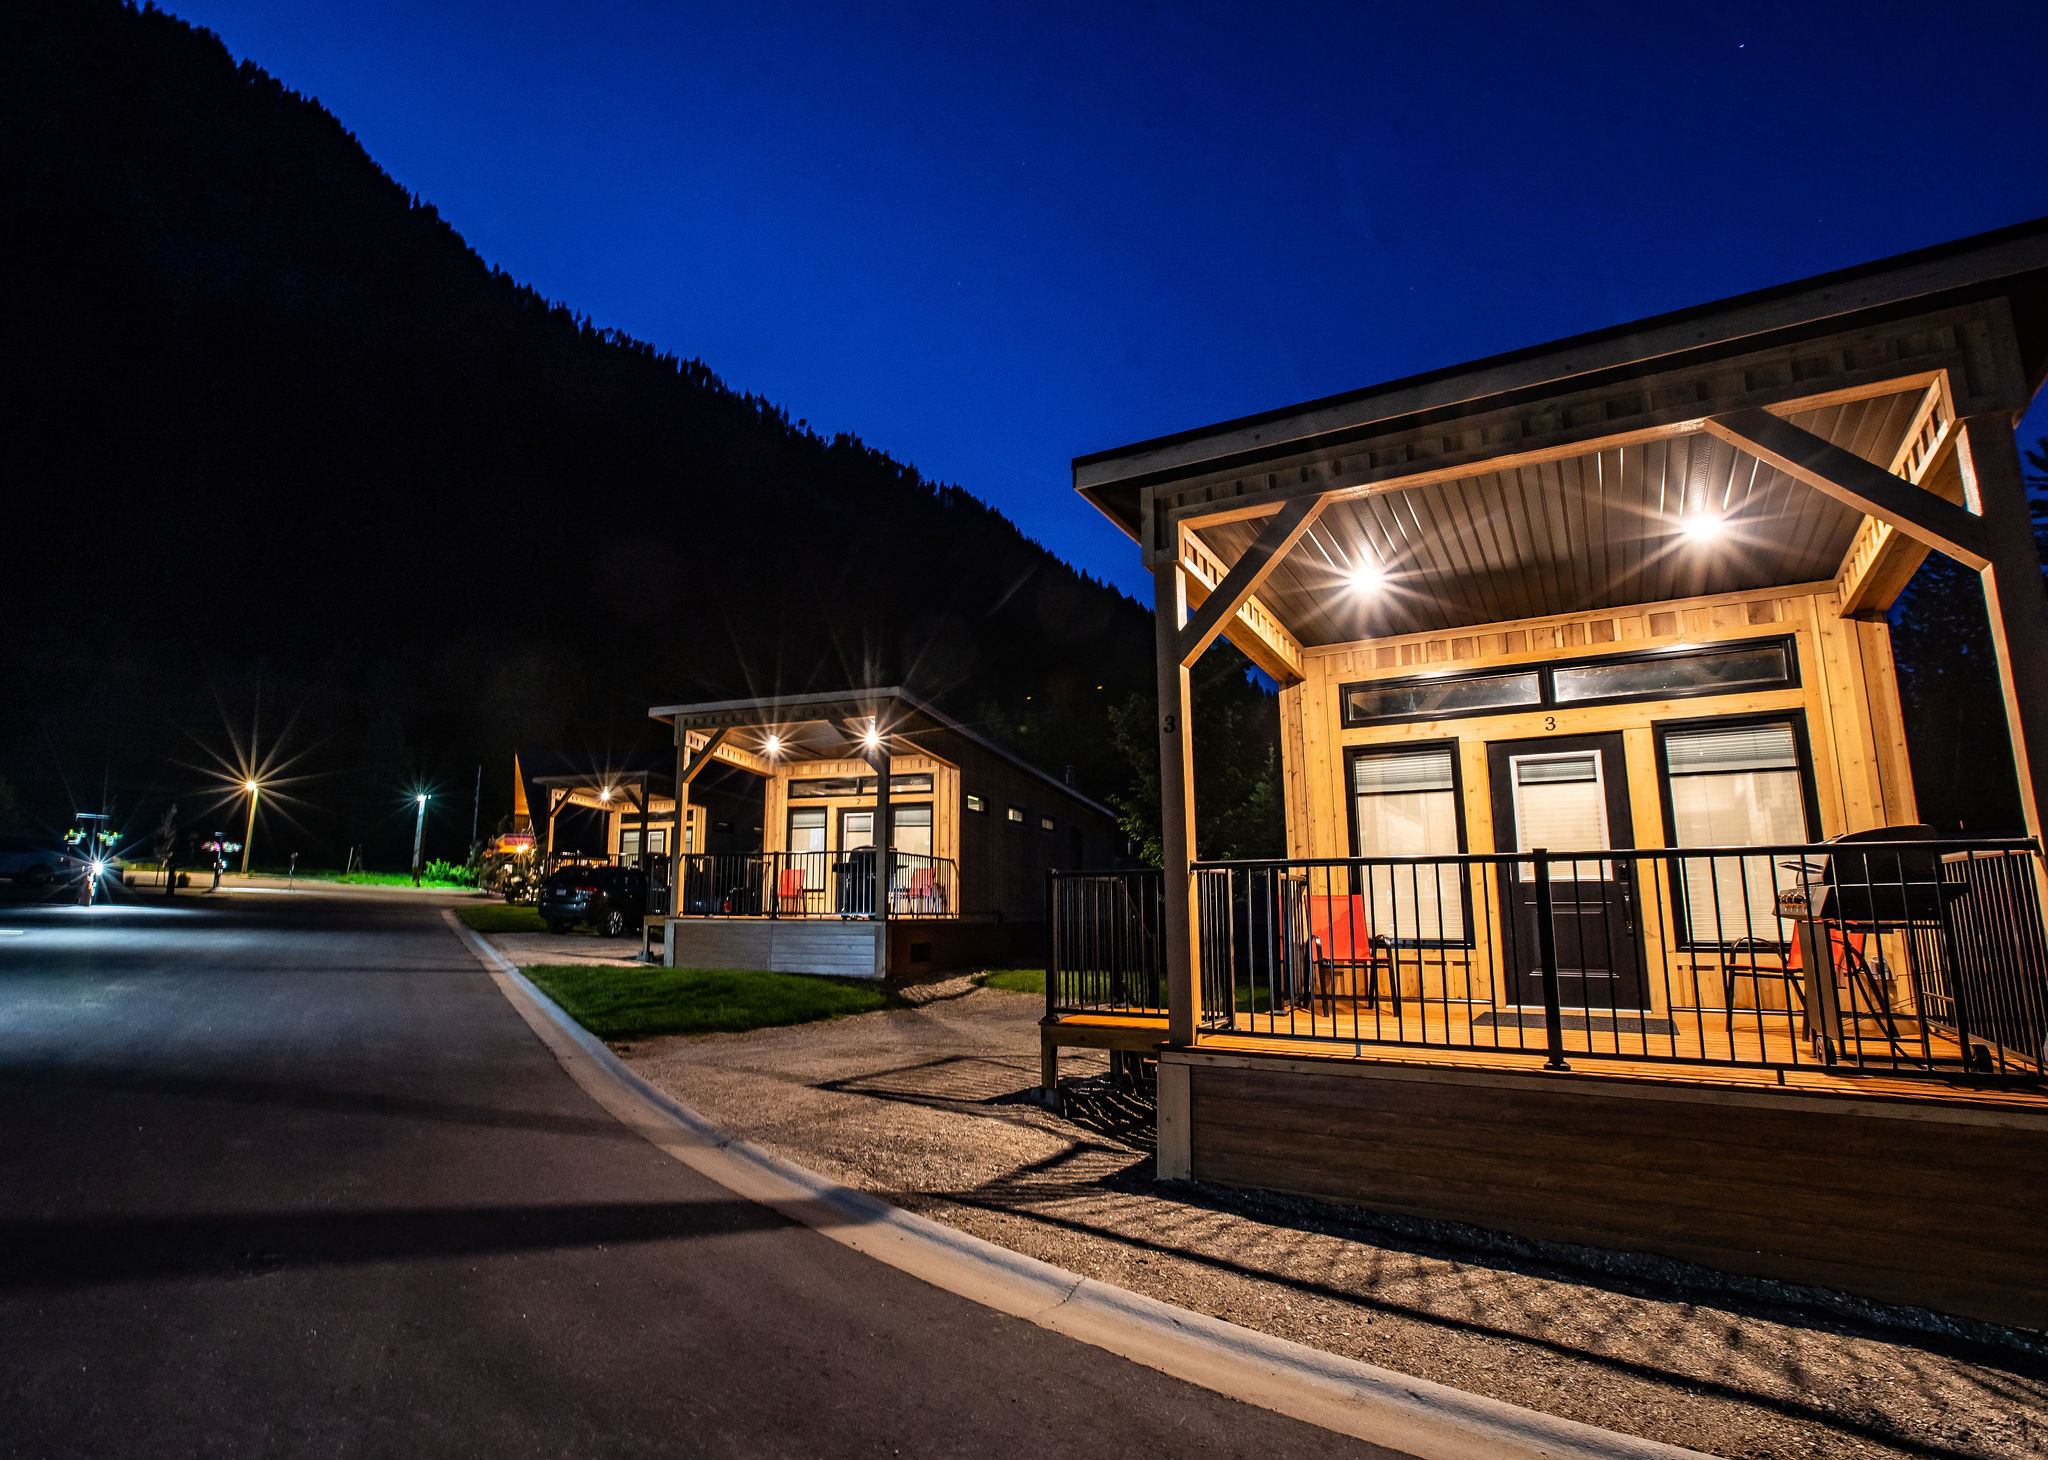 boulder mountain resort broad photo at night in the spring